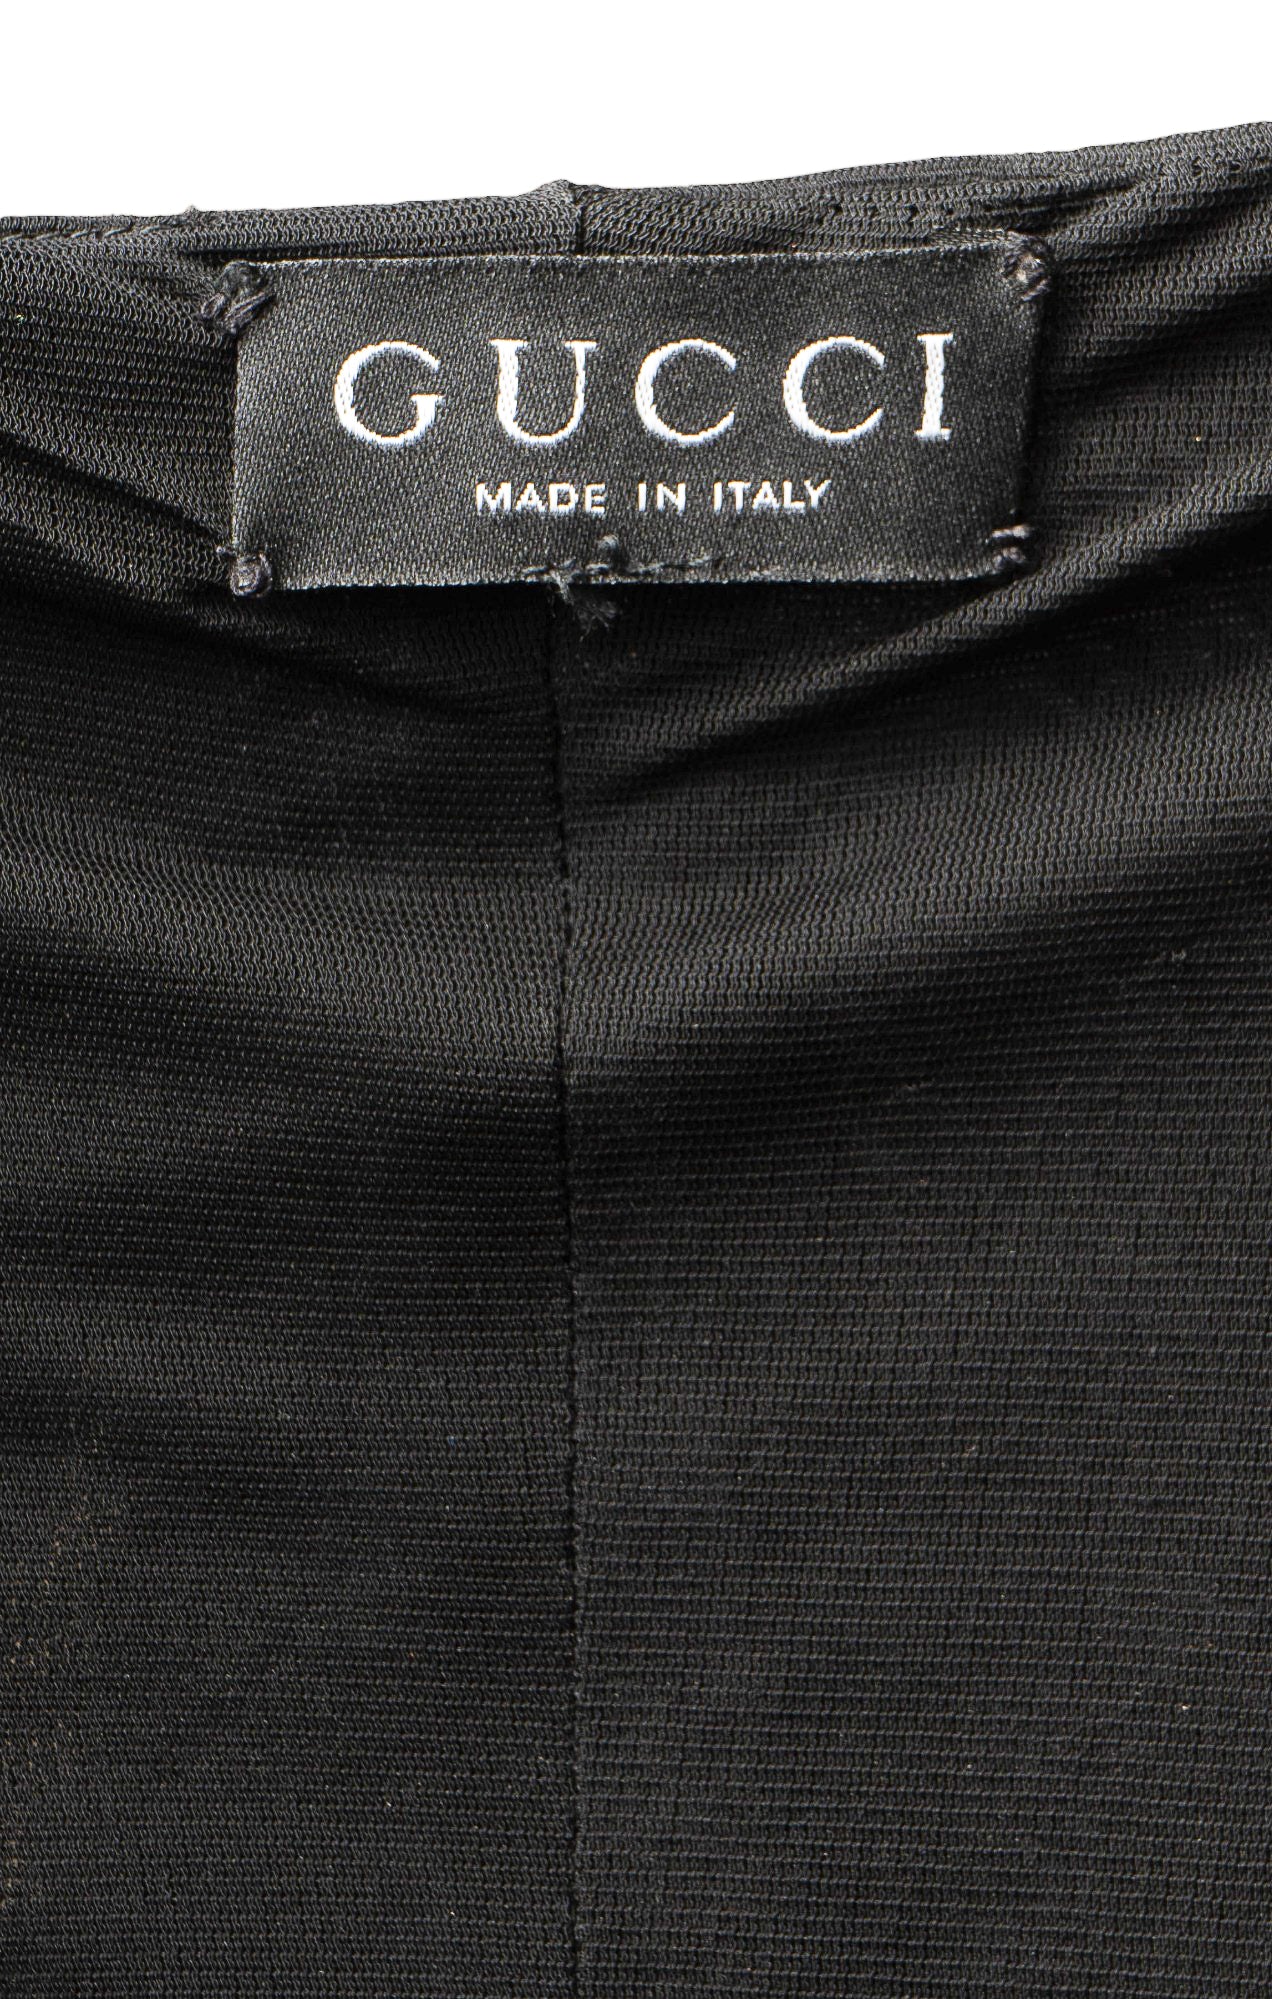 VINTAGE GUCCI (RARE) Top Size: No size tags, fits like XS/S